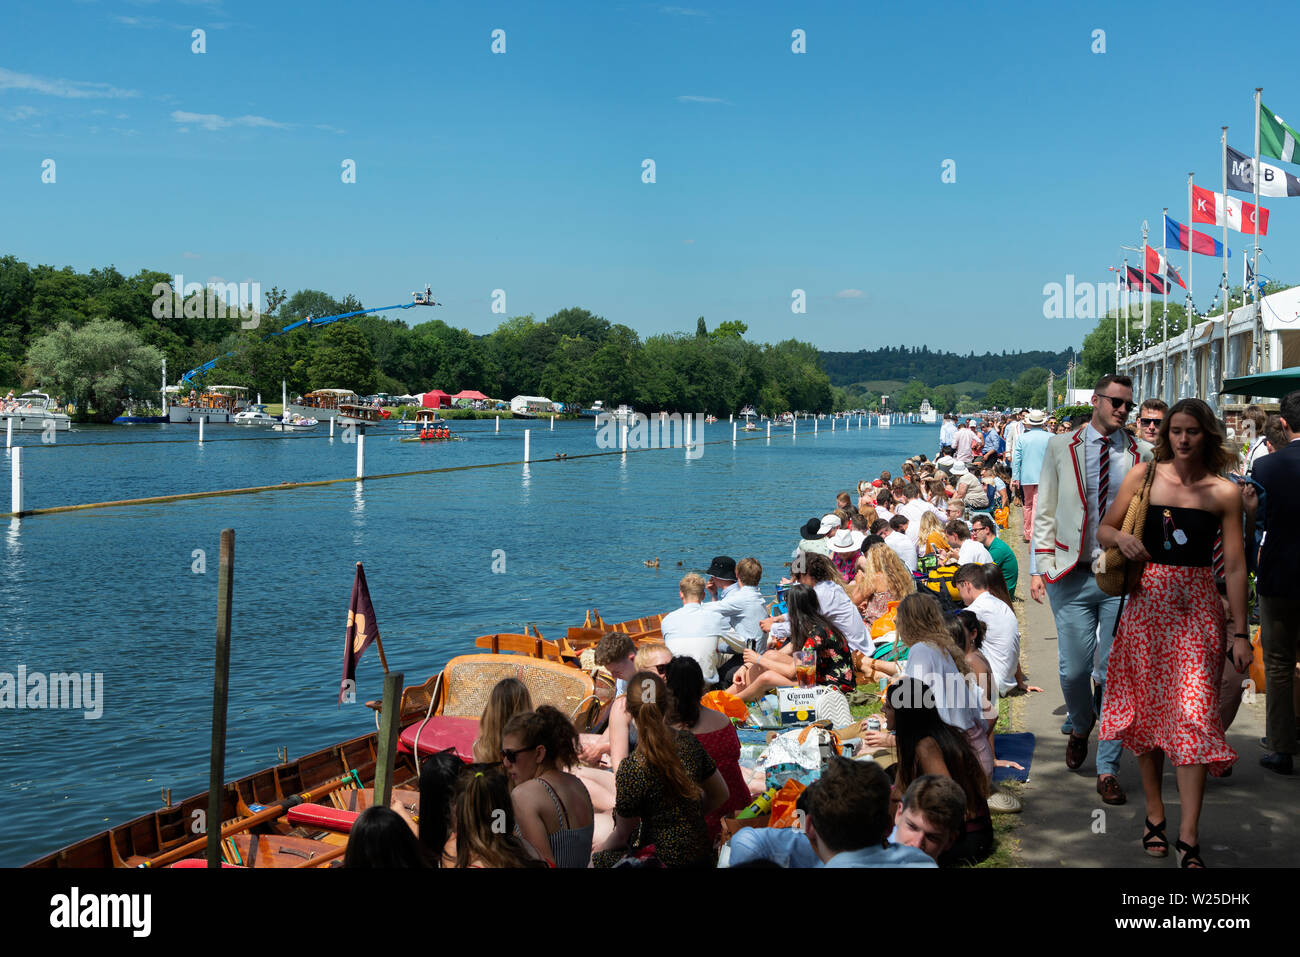 People line the banks of the River Thames during the Henley Royal Regatta to picnic and cheer on the rowing crews. Henley-on-Thames, England, UK Stock Photo